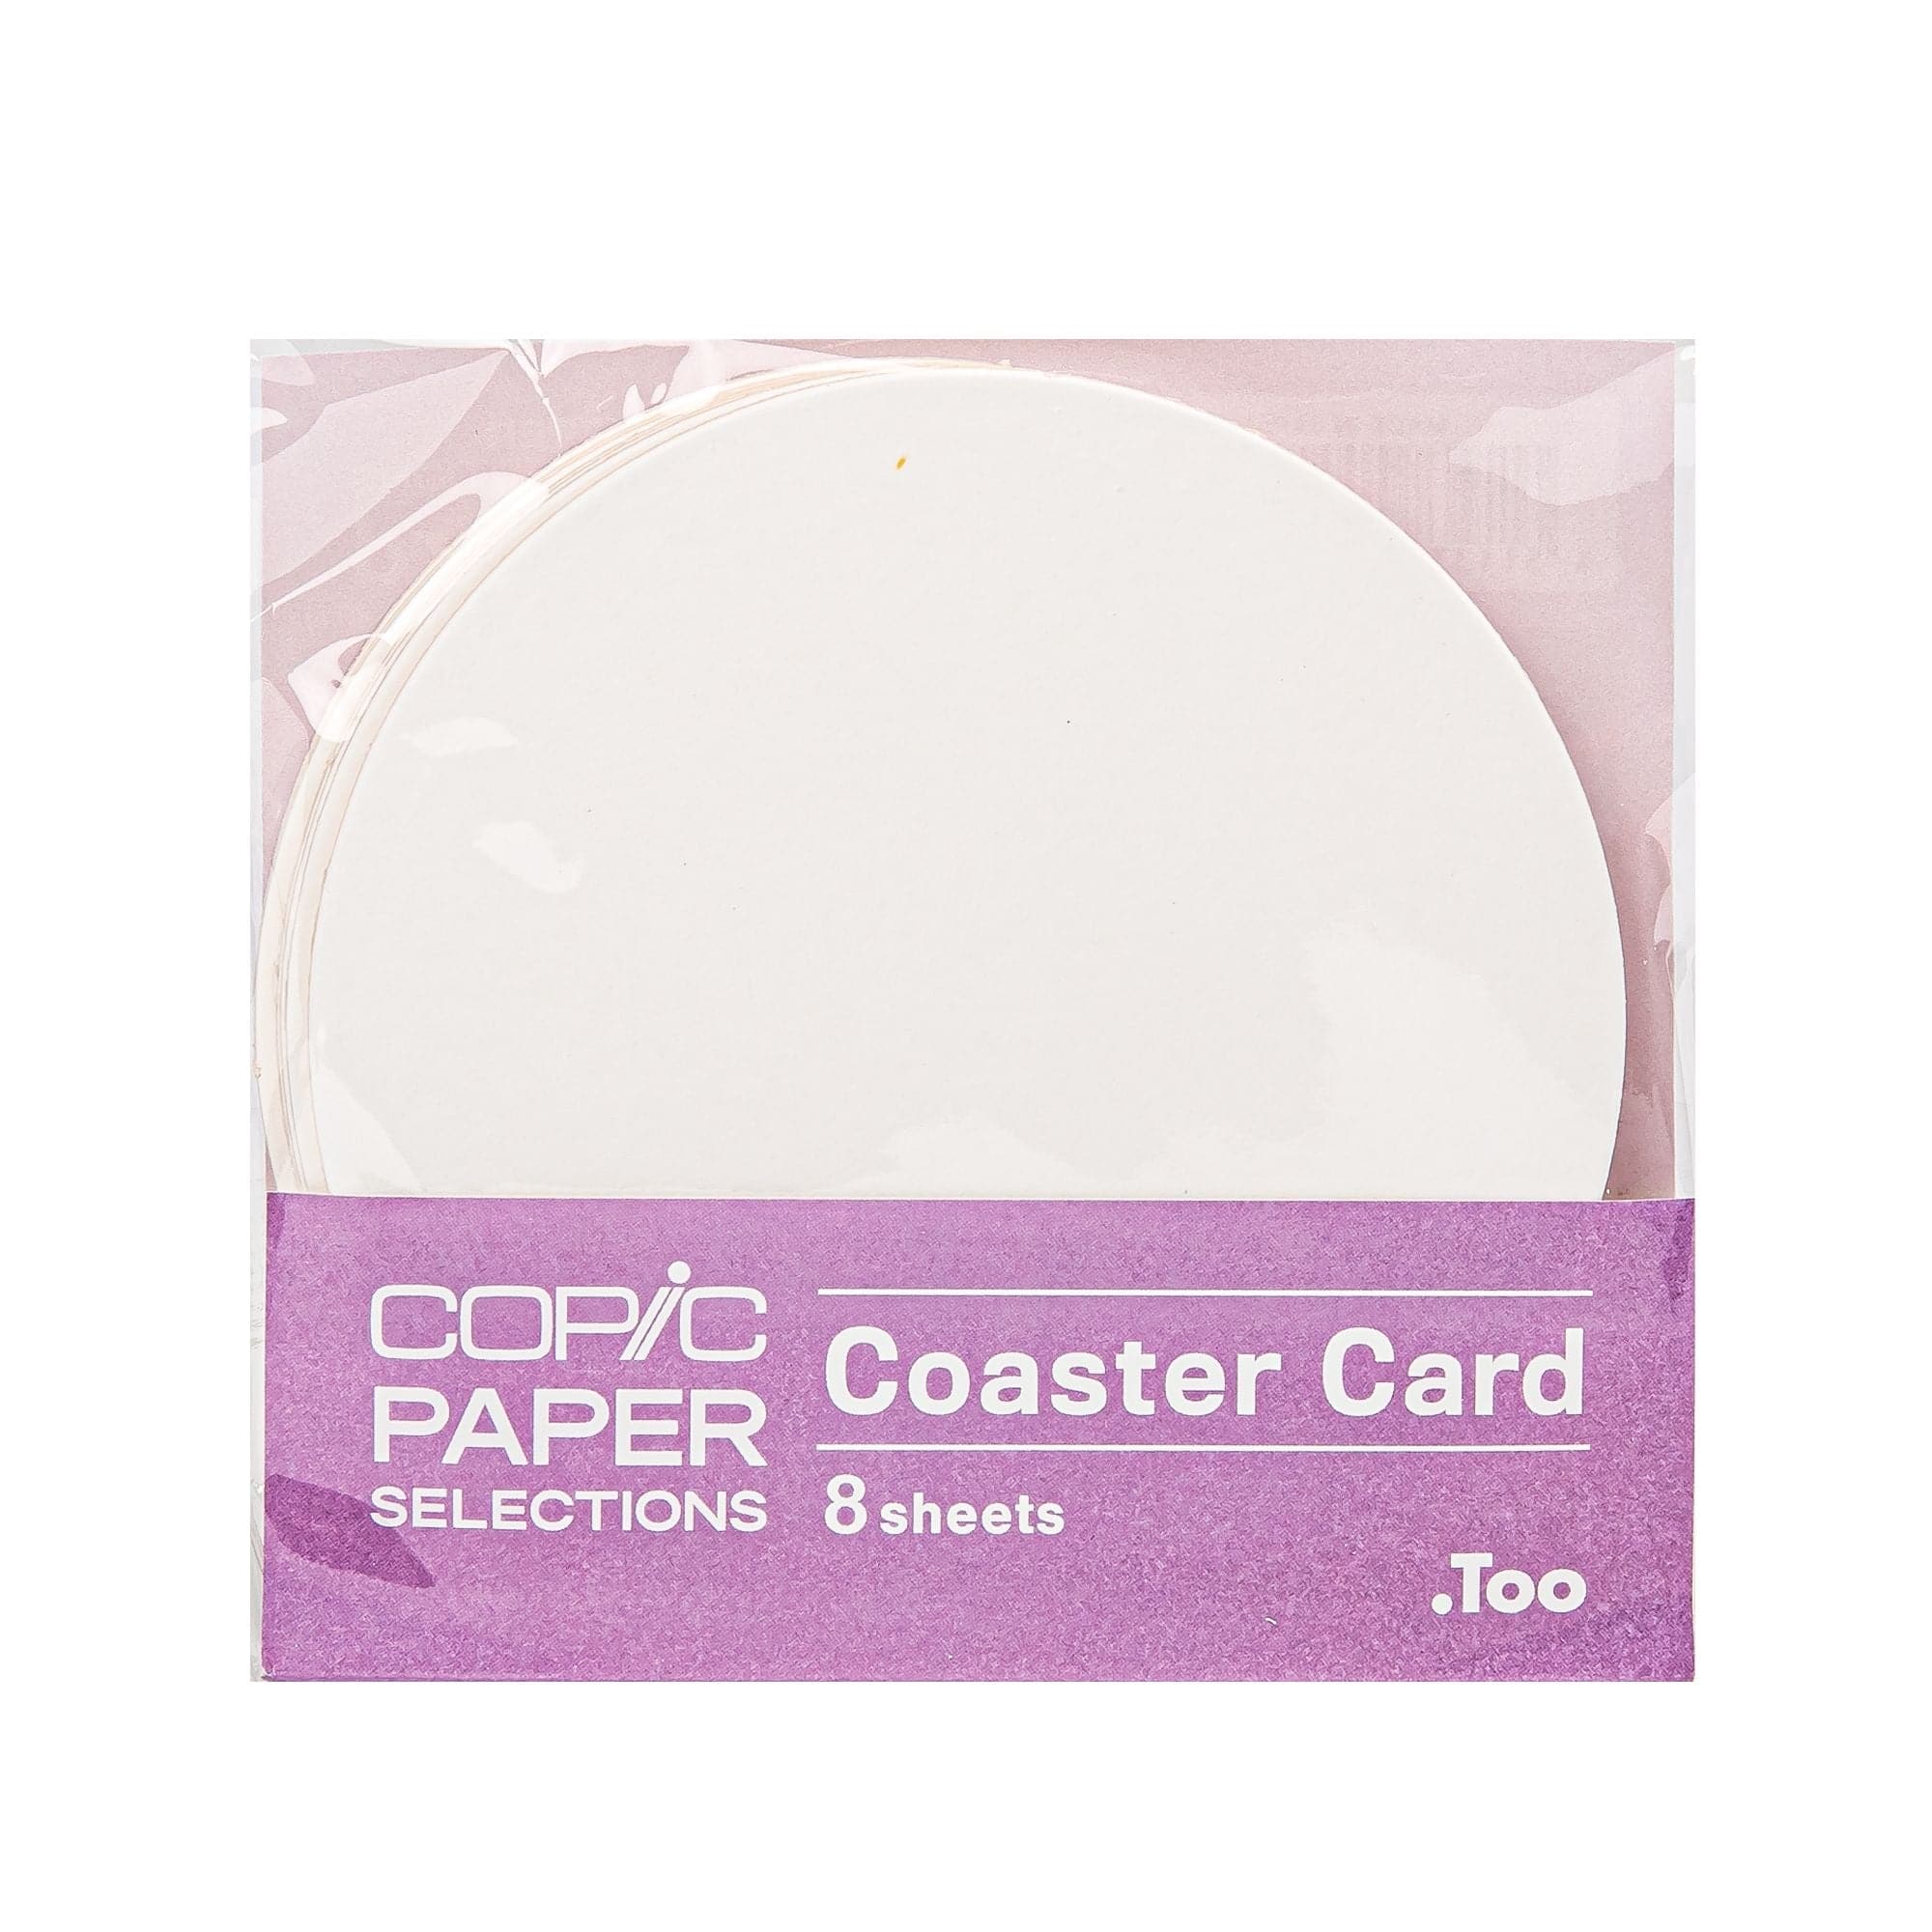 Copic Custom Paper A4 Thick Marker Paper, Coaster Card. High Quality Paper  Good Colour Rendering High Quality. Super-smooth - AliExpress